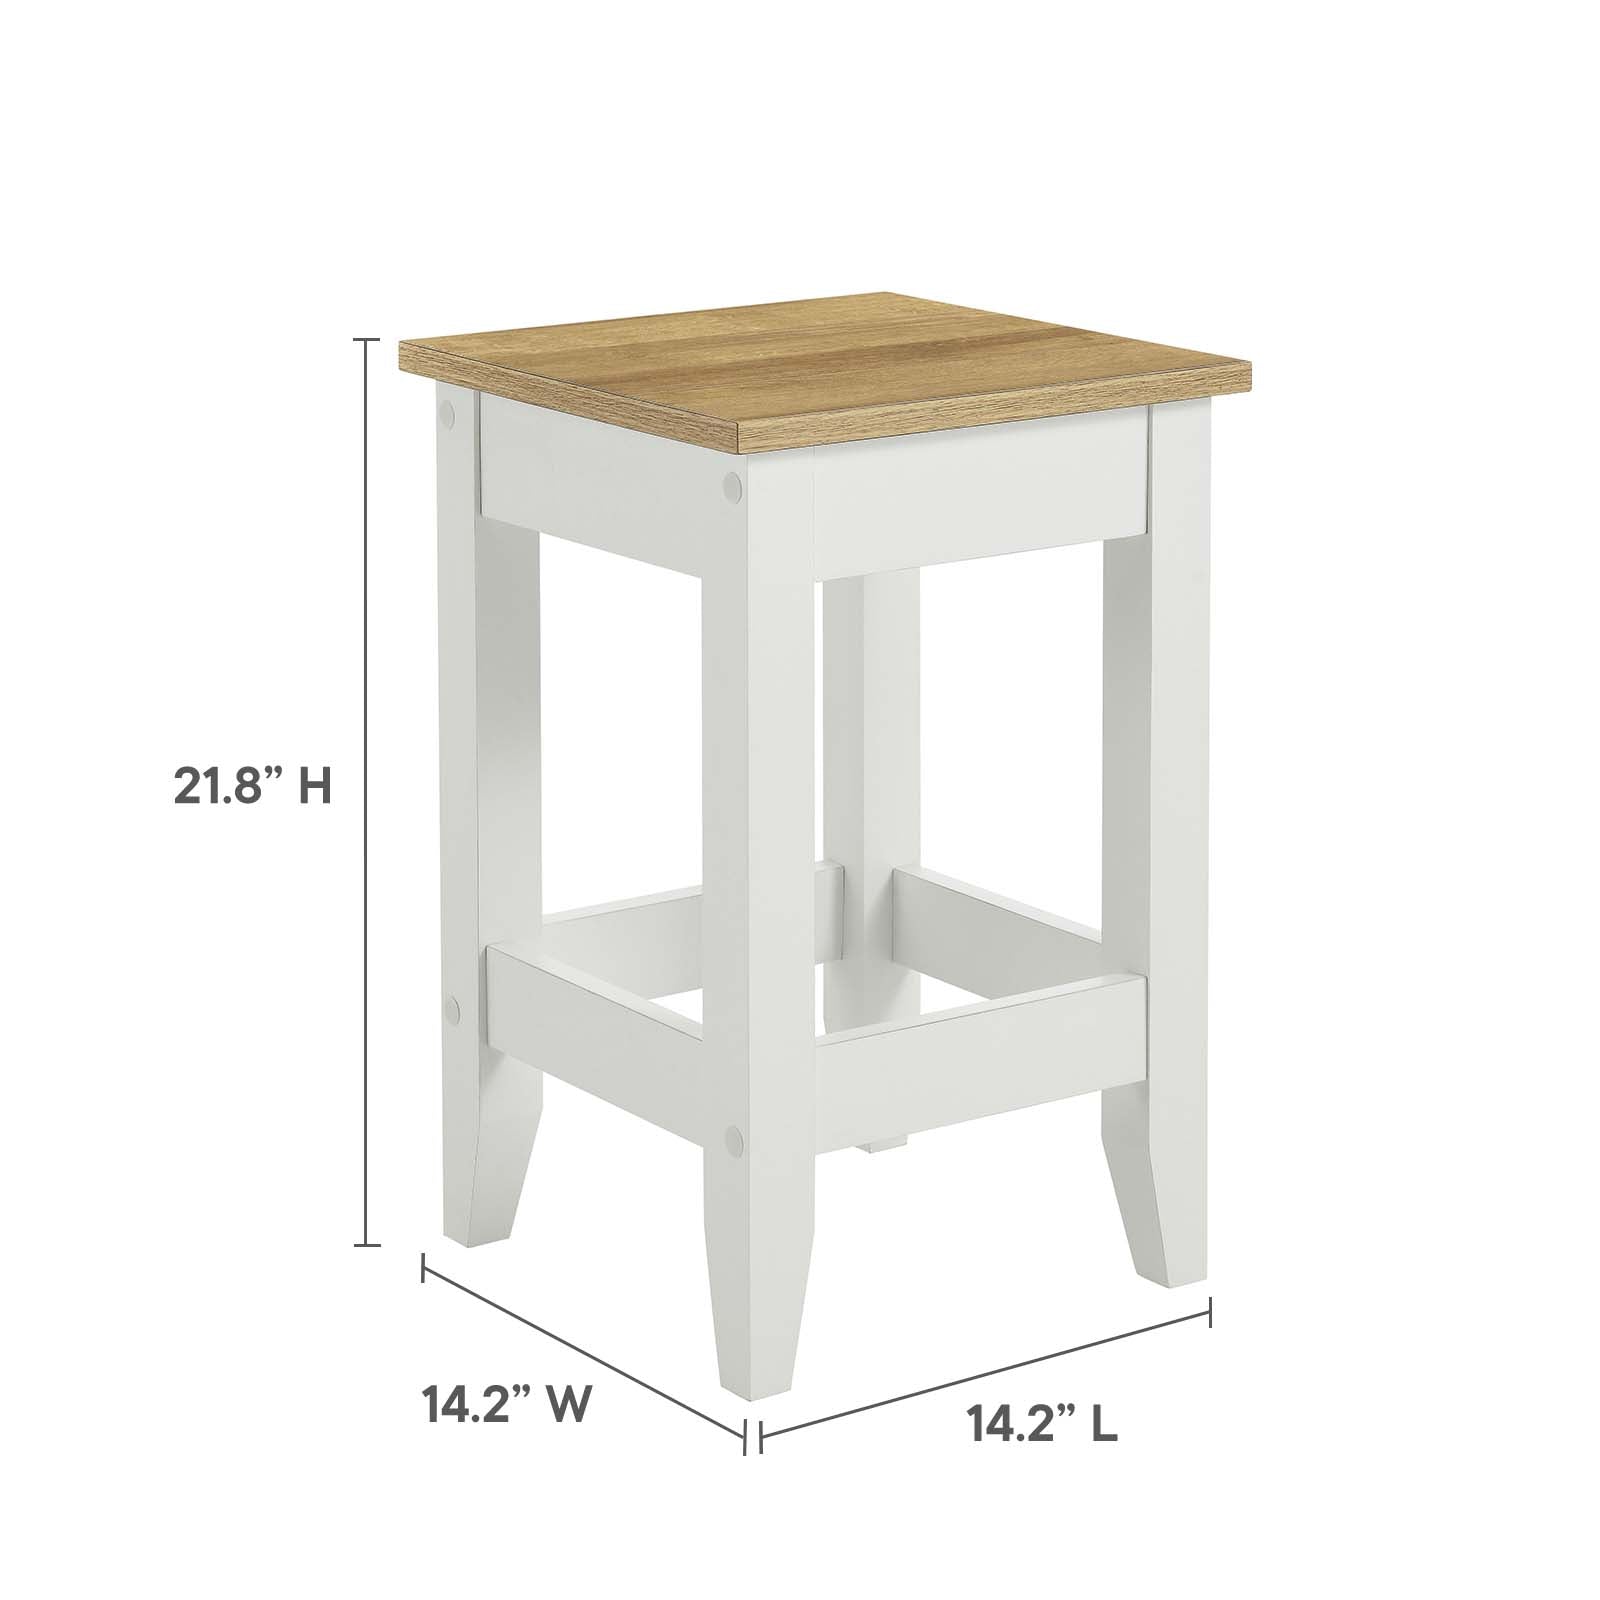 Garland 3-Piece Kitchen Island and Stool Set - East Shore Modern Home Furnishings